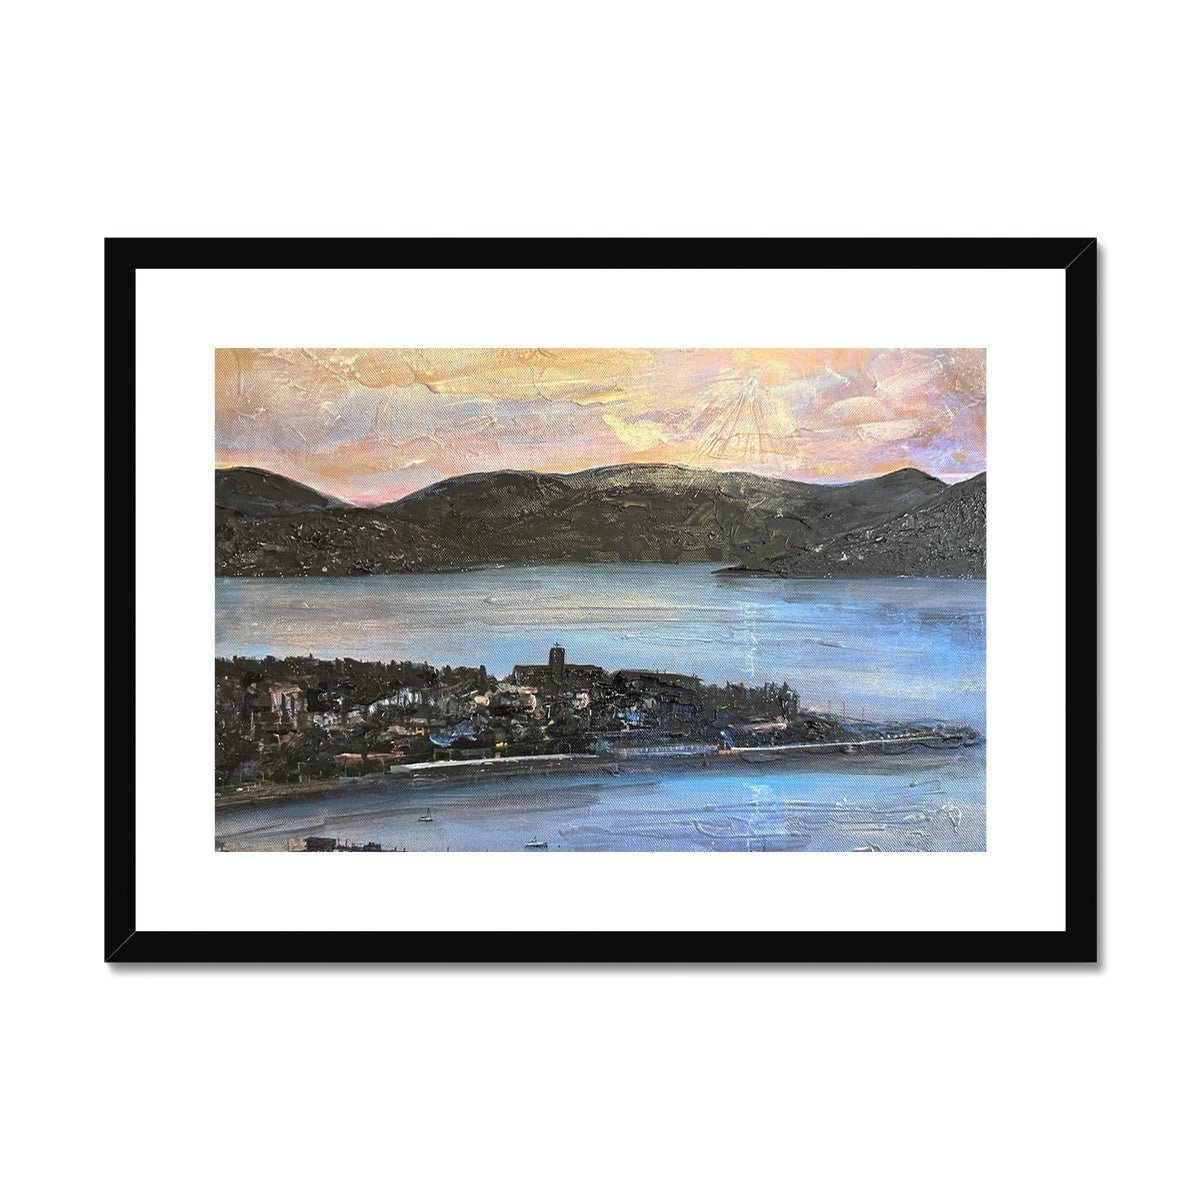 From Lyle Hill Painting | Framed & Mounted Prints From Scotland-Framed & Mounted Prints-River Clyde Art Gallery-A2 Landscape-Black Frame-Paintings, Prints, Homeware, Art Gifts From Scotland By Scottish Artist Kevin Hunter